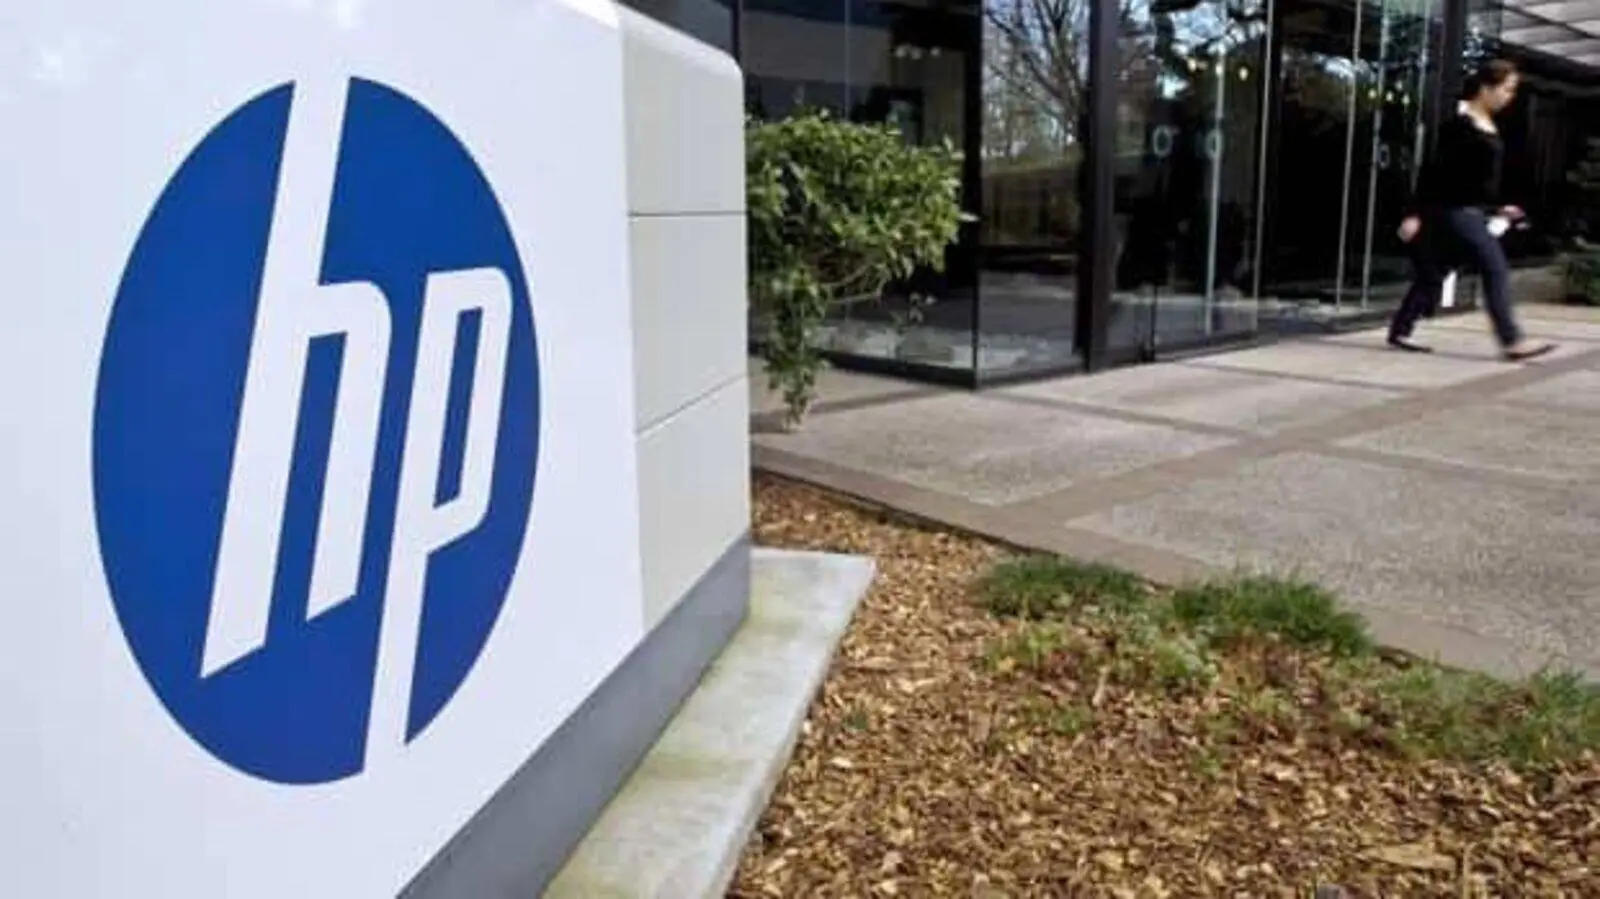 hewlett packard layoffs - How many people are being laid off by the numbers for Hewlett Packard